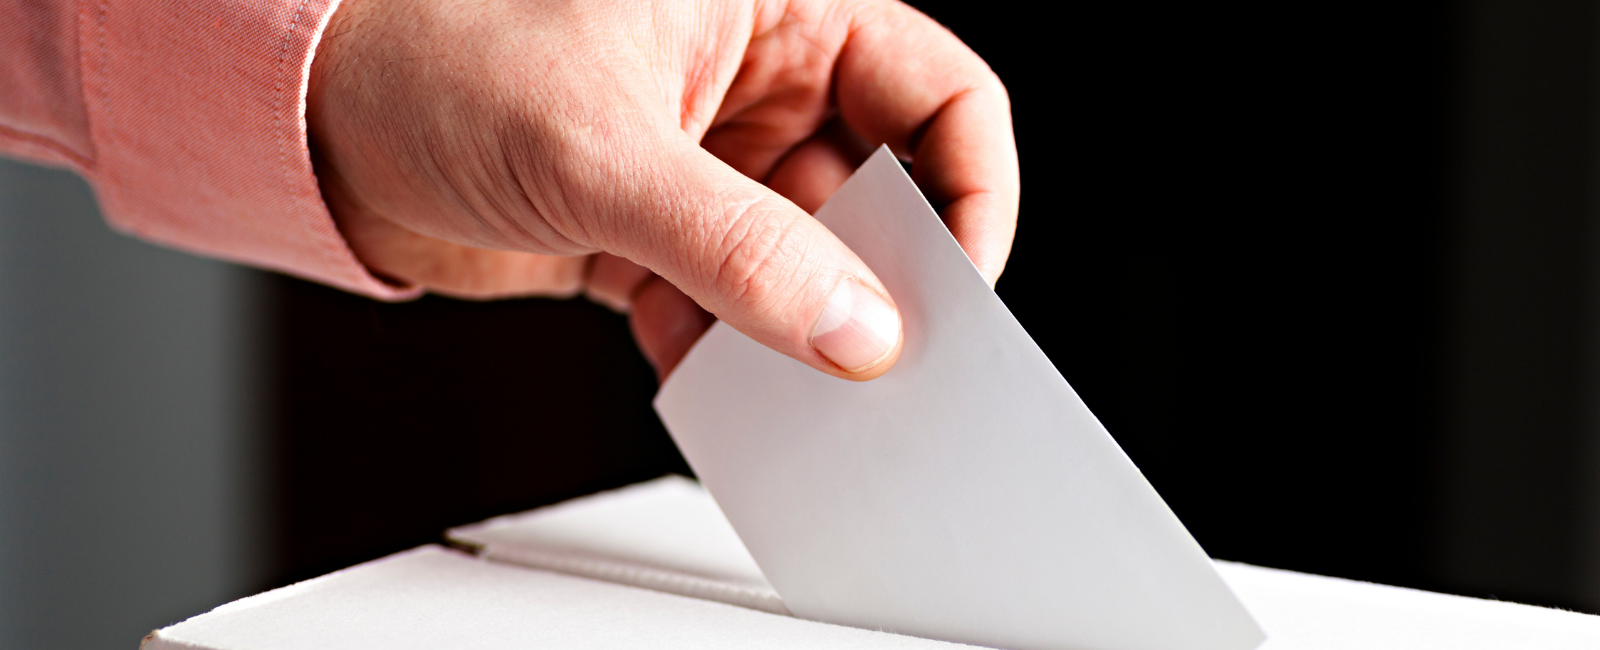 Image of someone casting their vote into a ballot box